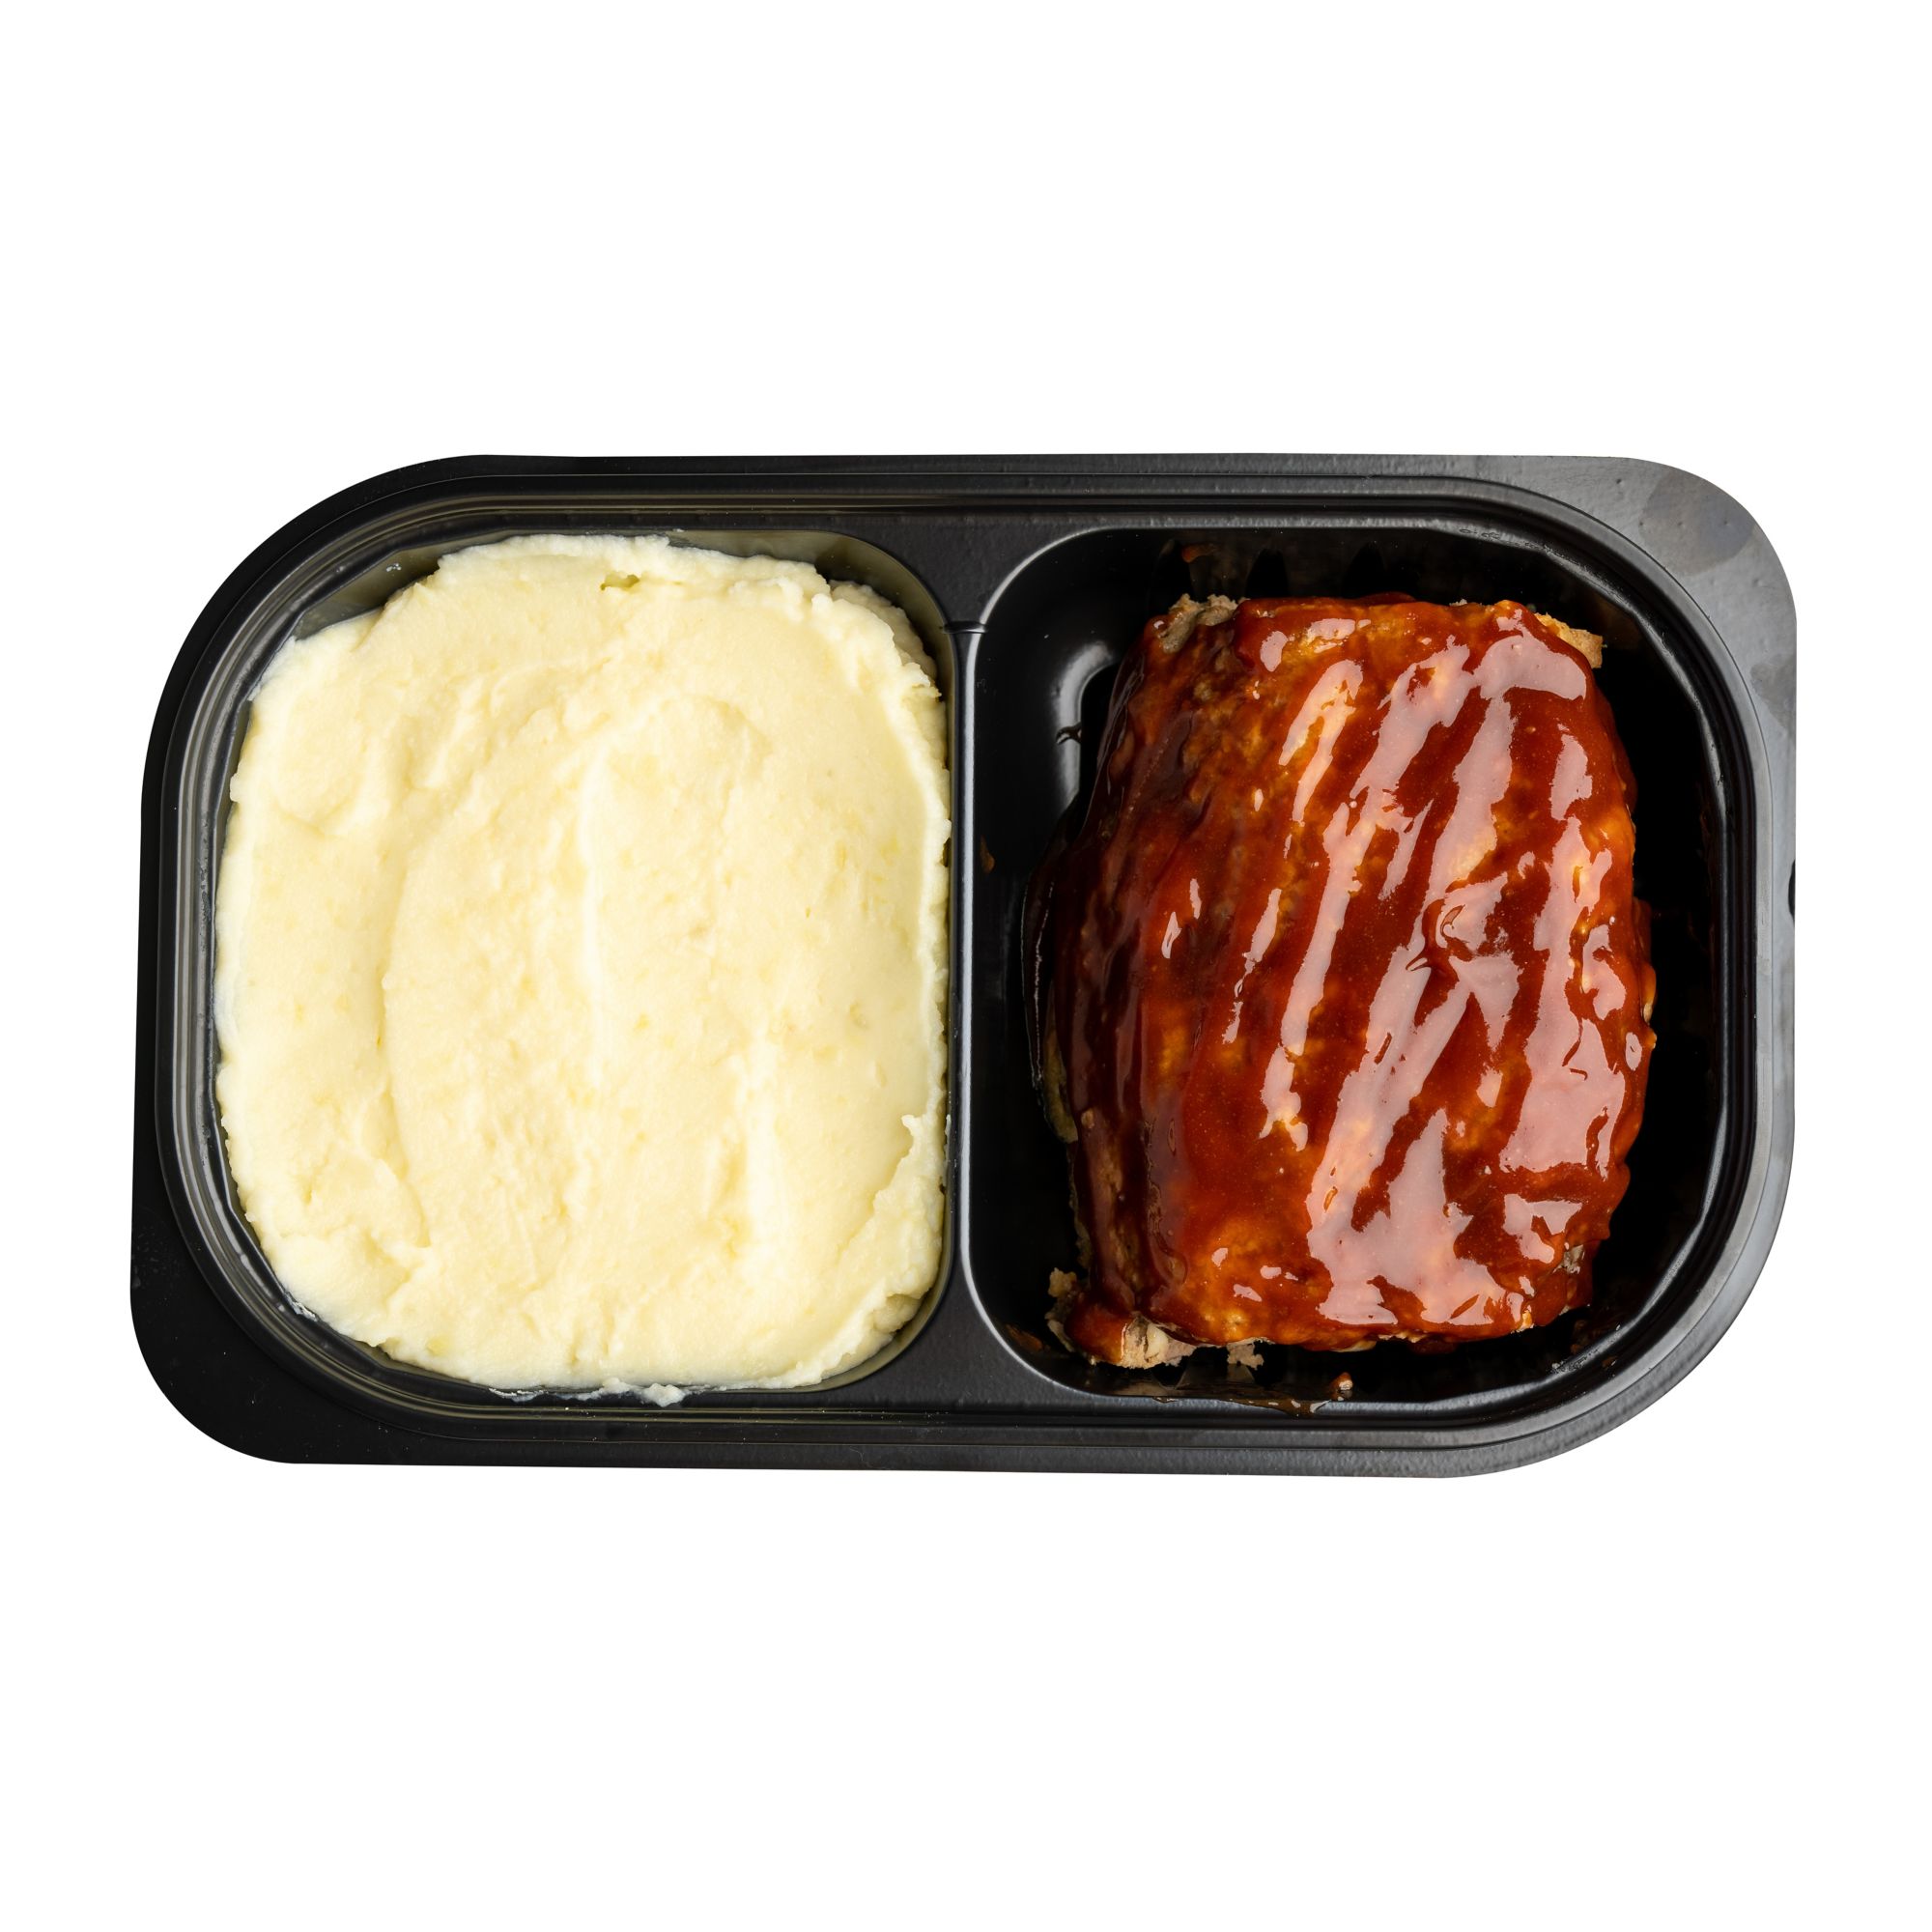 Wellsley Farms Meatloaf and Mashed Potato - BJs Wholesale Club